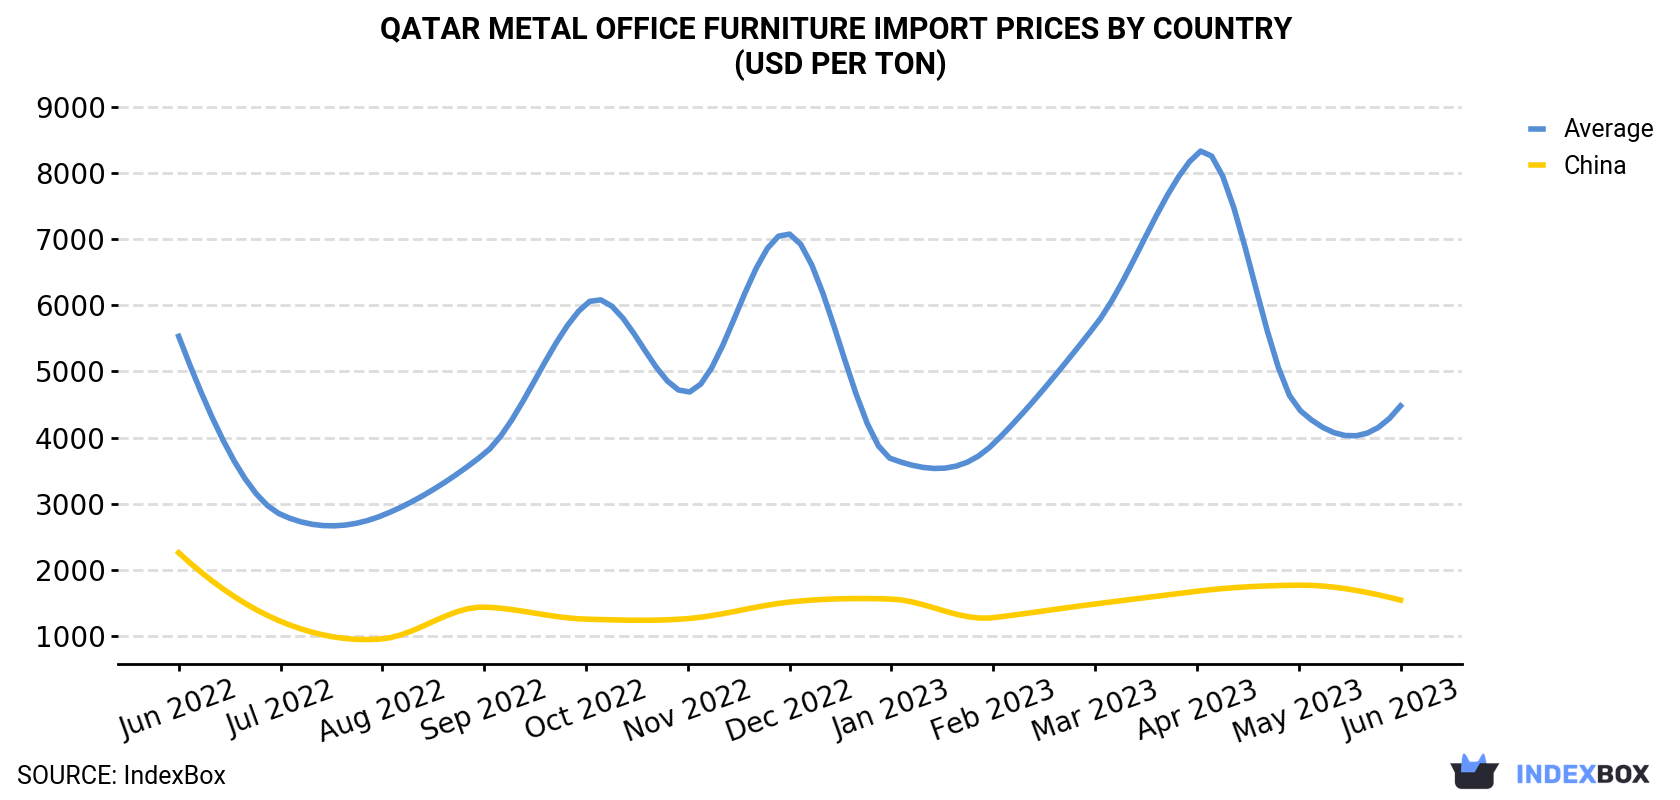 Qatar Metal Office Furniture Import Prices By Country (USD Per Ton)